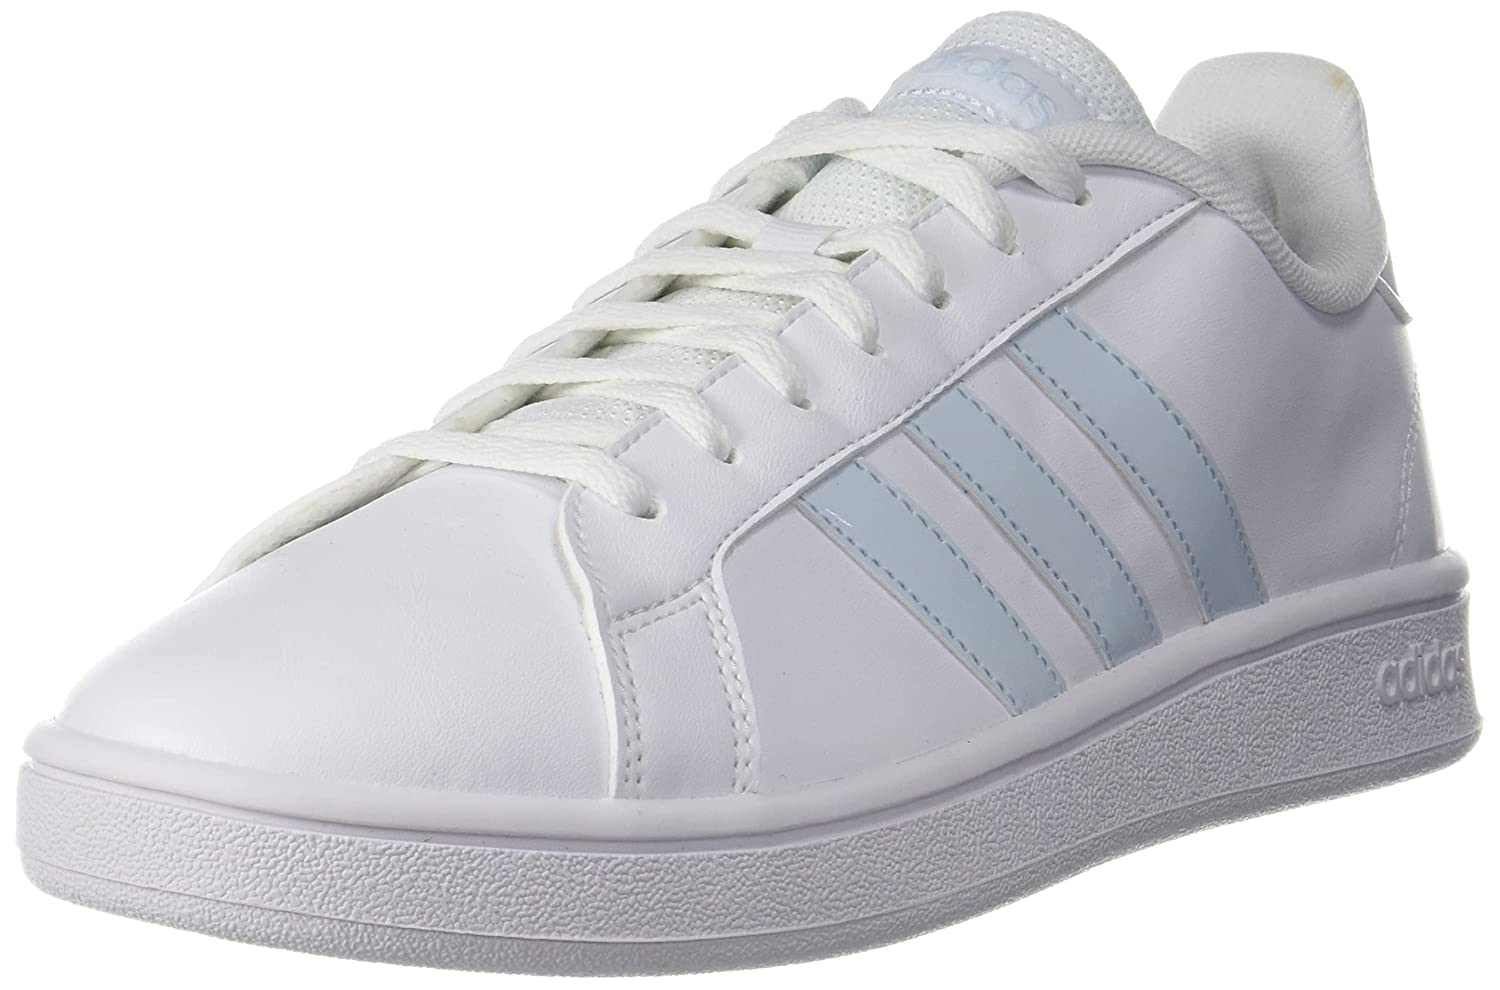 Amazon Festival Sale On Adidas Shoes Buy Adidas For Men Adidas Sports Discount Adidas Women Sneakers | Festival Sale: Will Not Get Adidas Shoes At A Cheaper Price